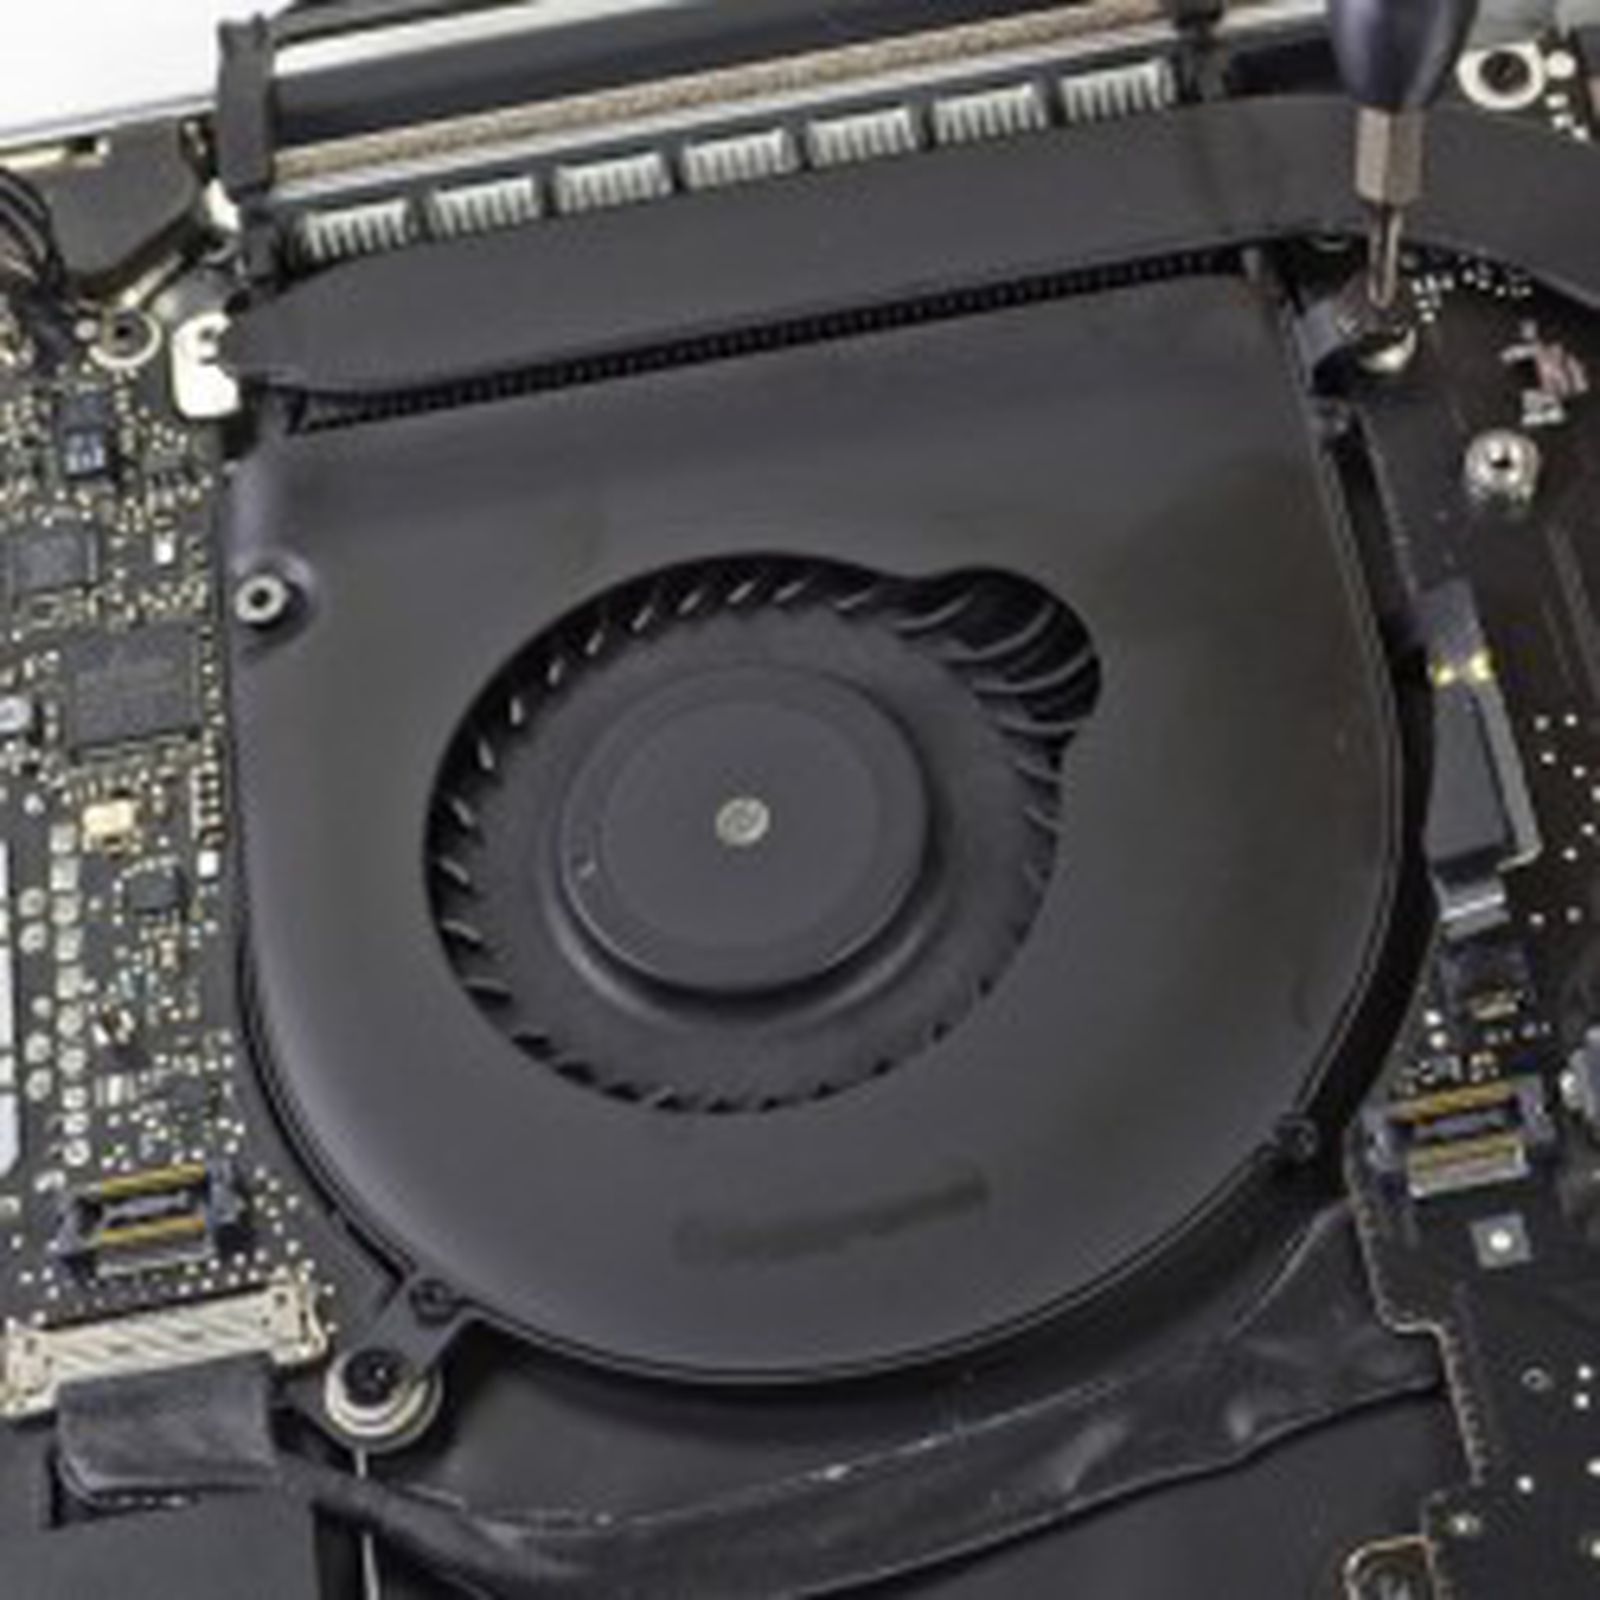 15-Inch Retina MacBook Pro Users Experiencing Fan Issues Related to - MacRumors